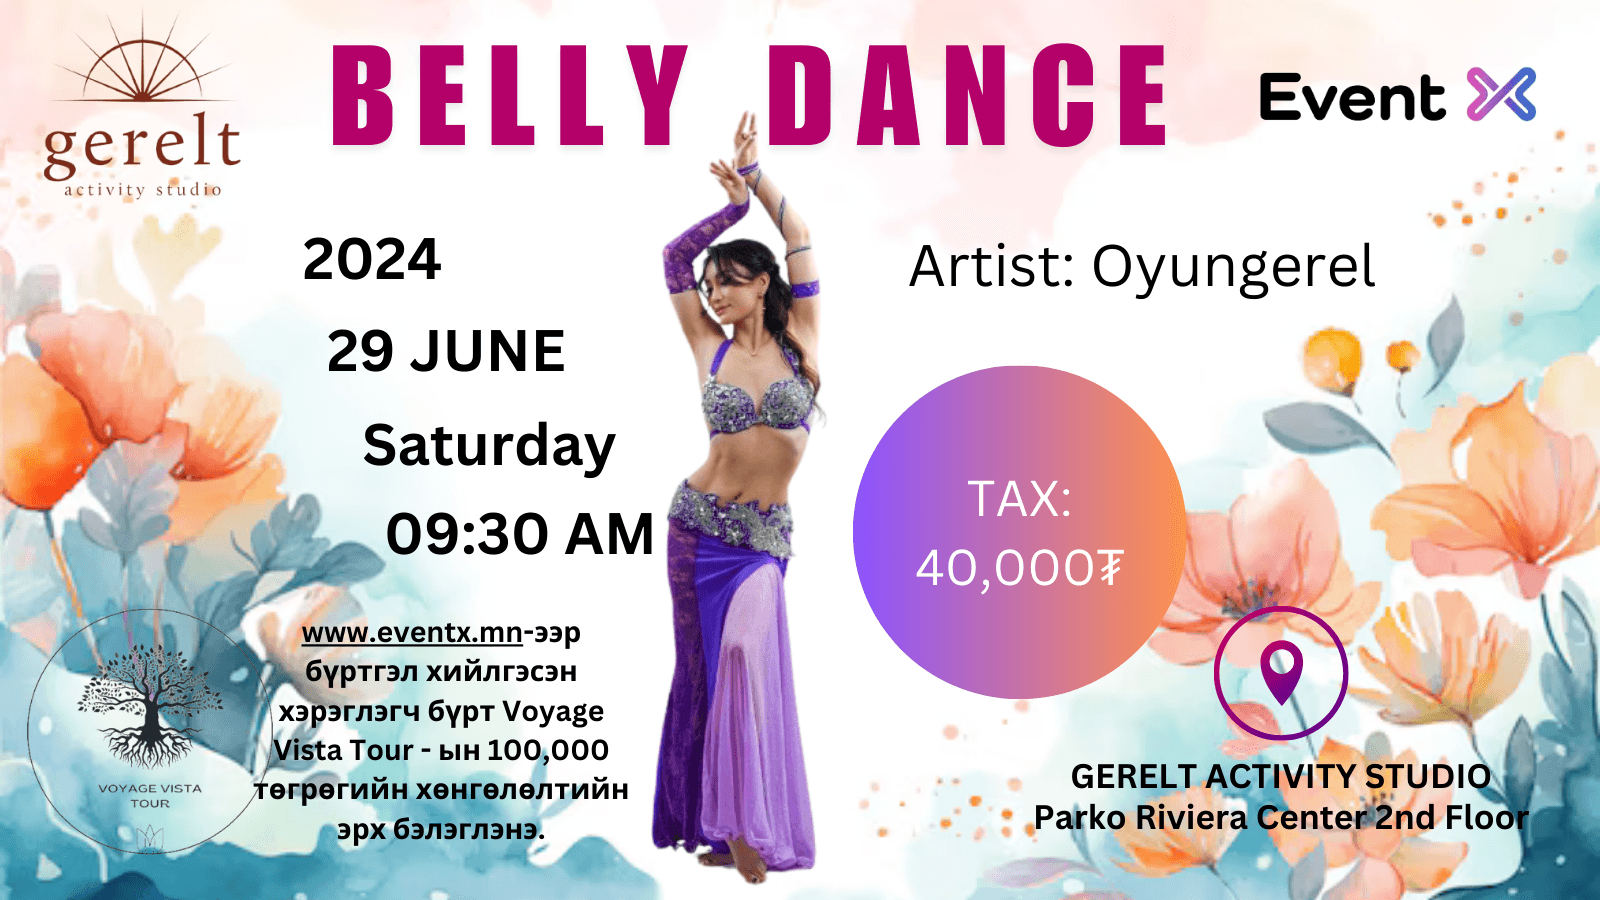 Belly dance event 